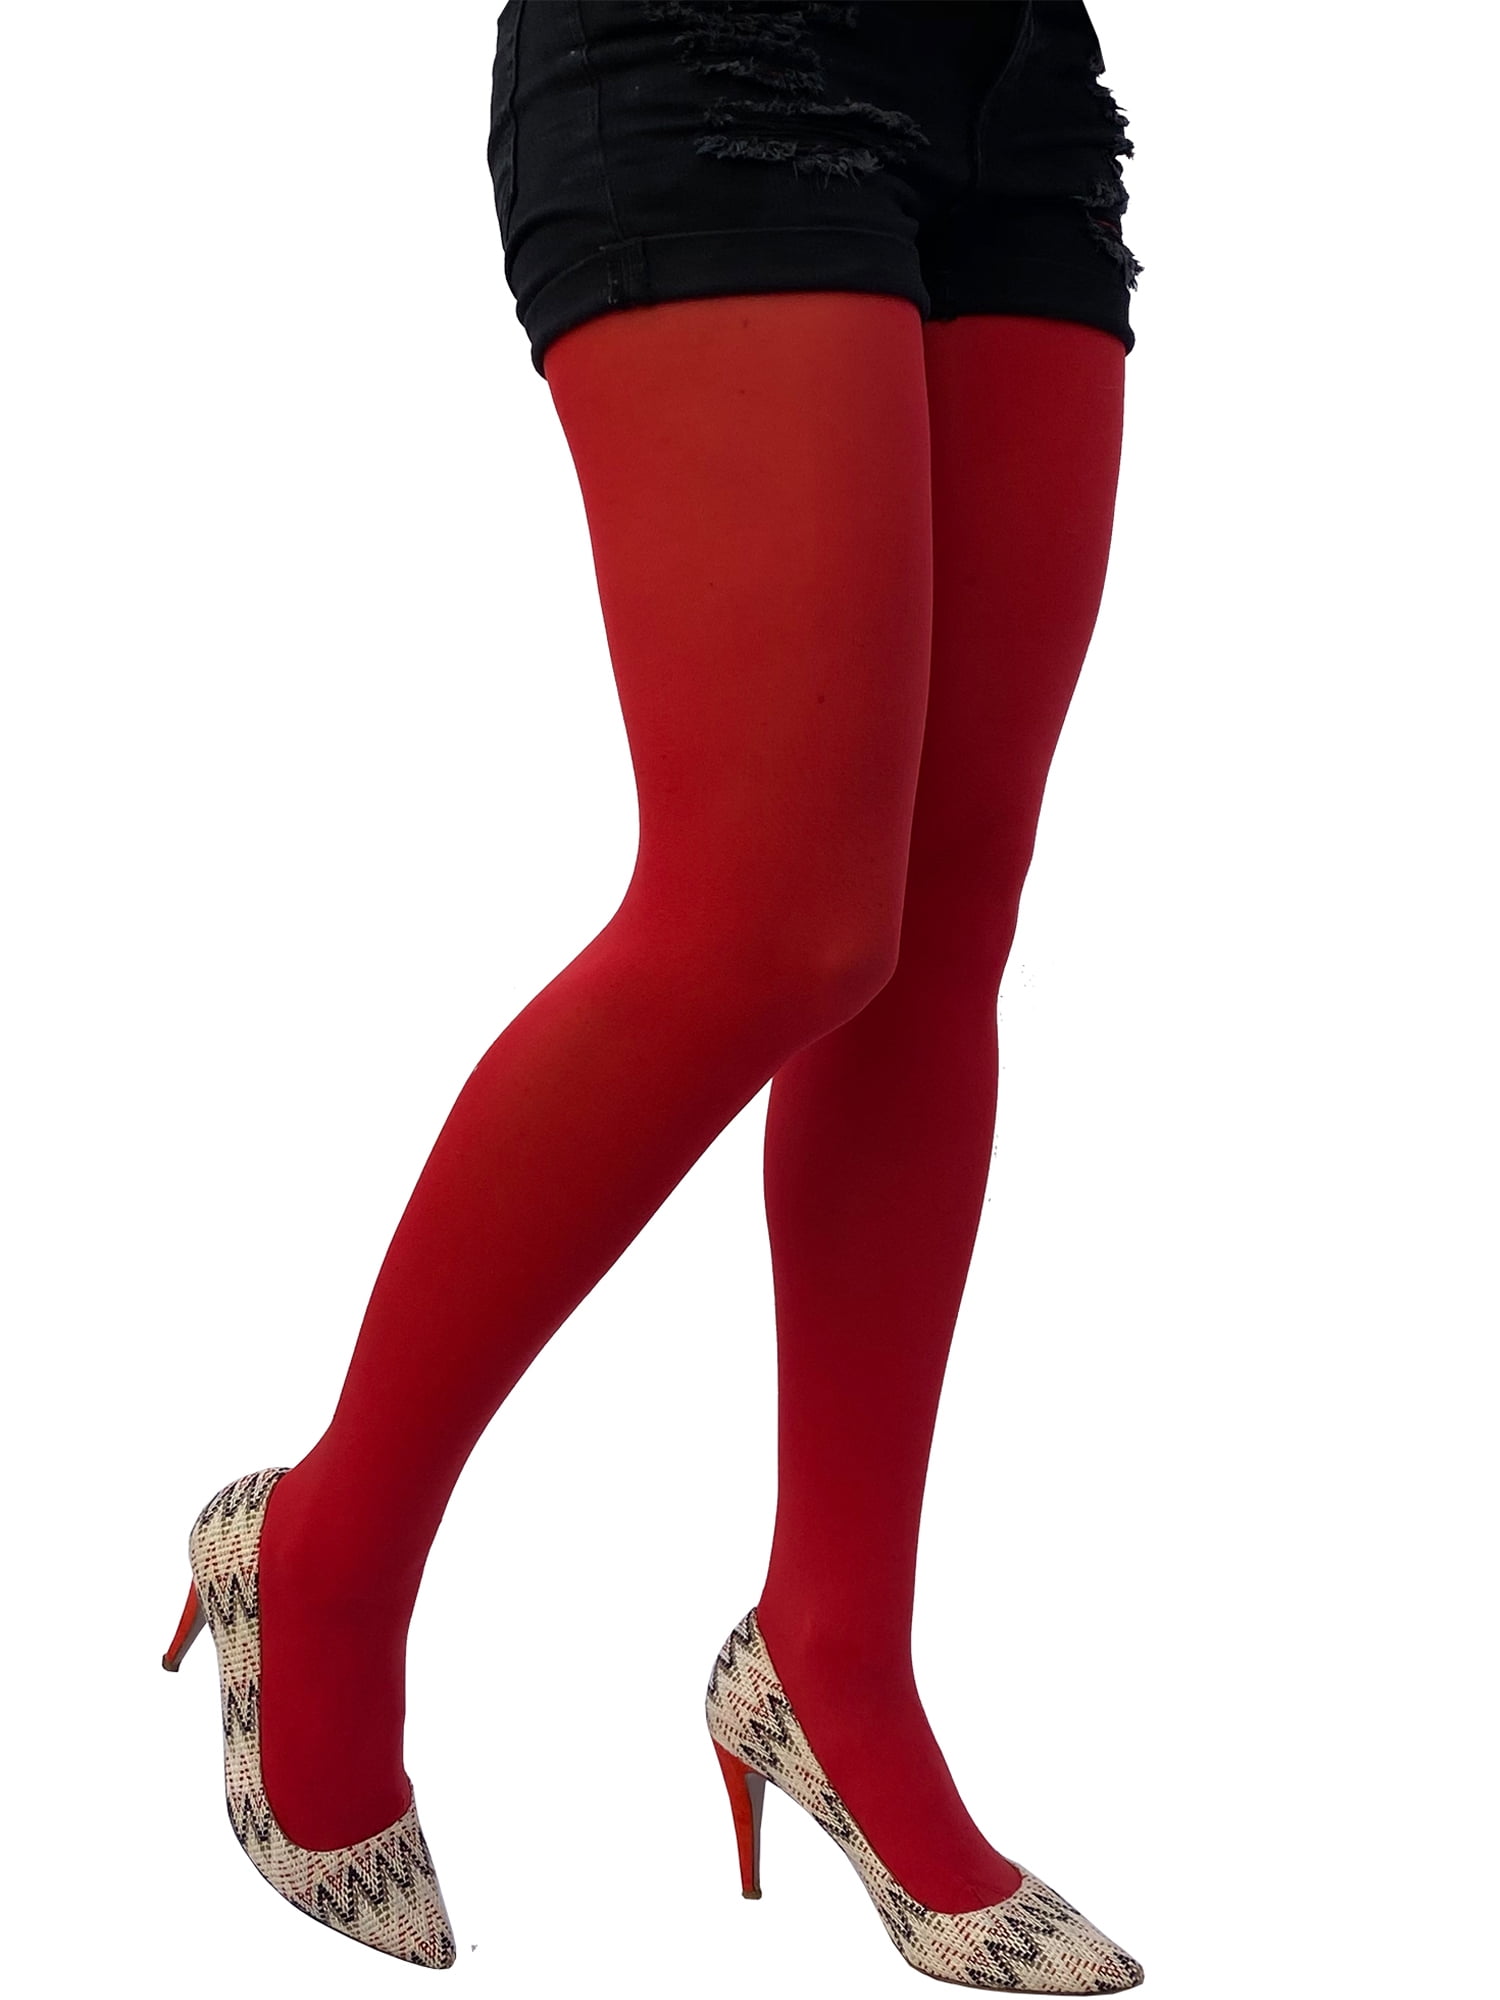 Red Opaque Full Footed Tights, Pantyhose for Women Nigeria